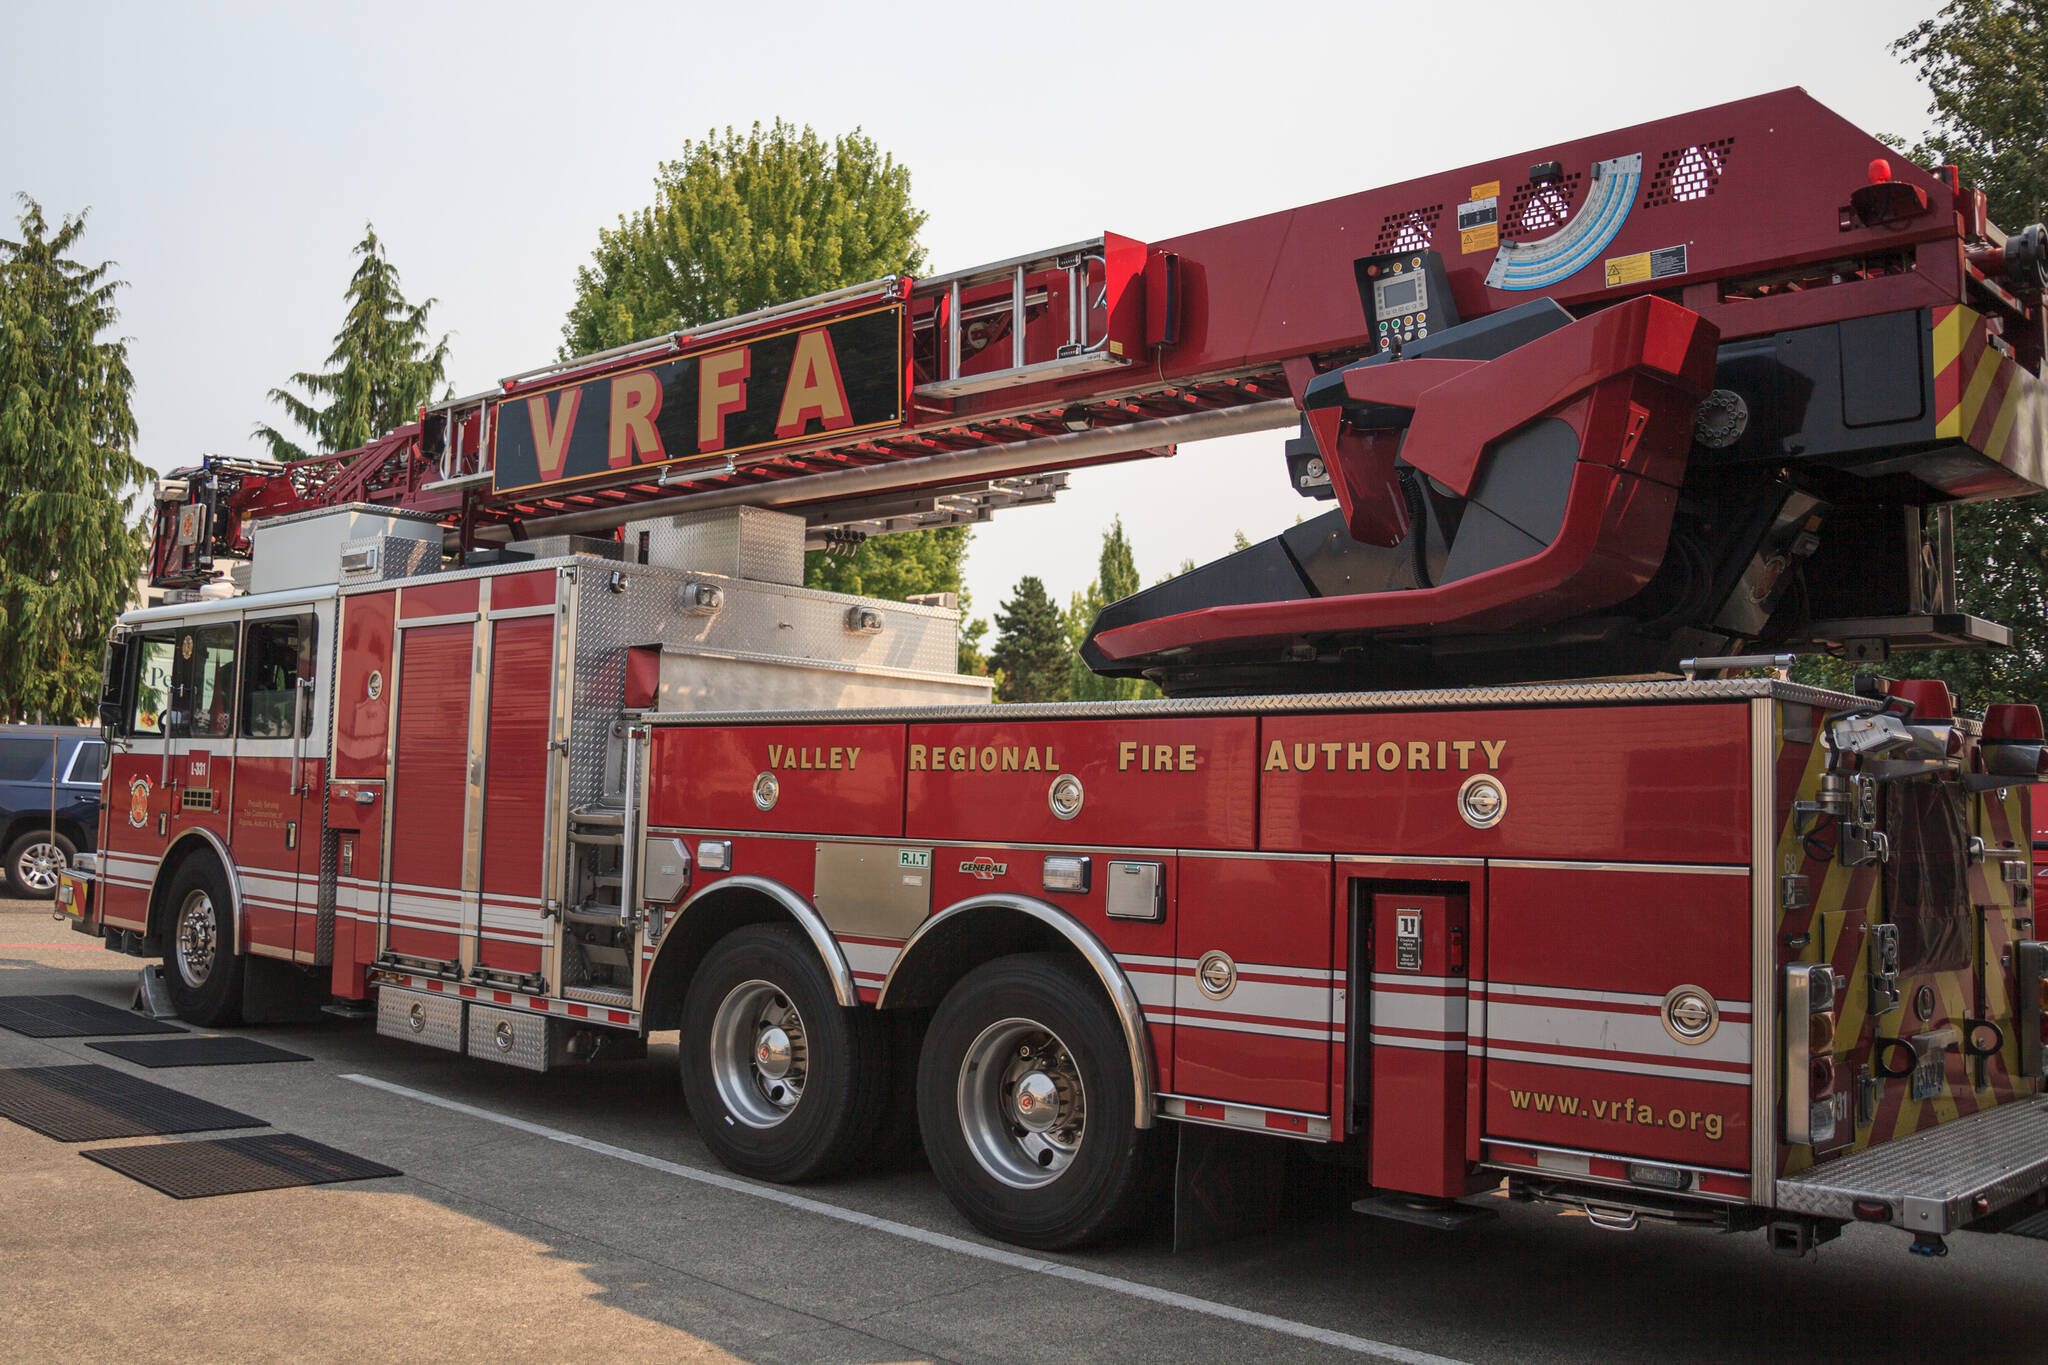 Valley Regional Fire Authority truck. Photo by Henry Stewart-Wood/Sound Publishing